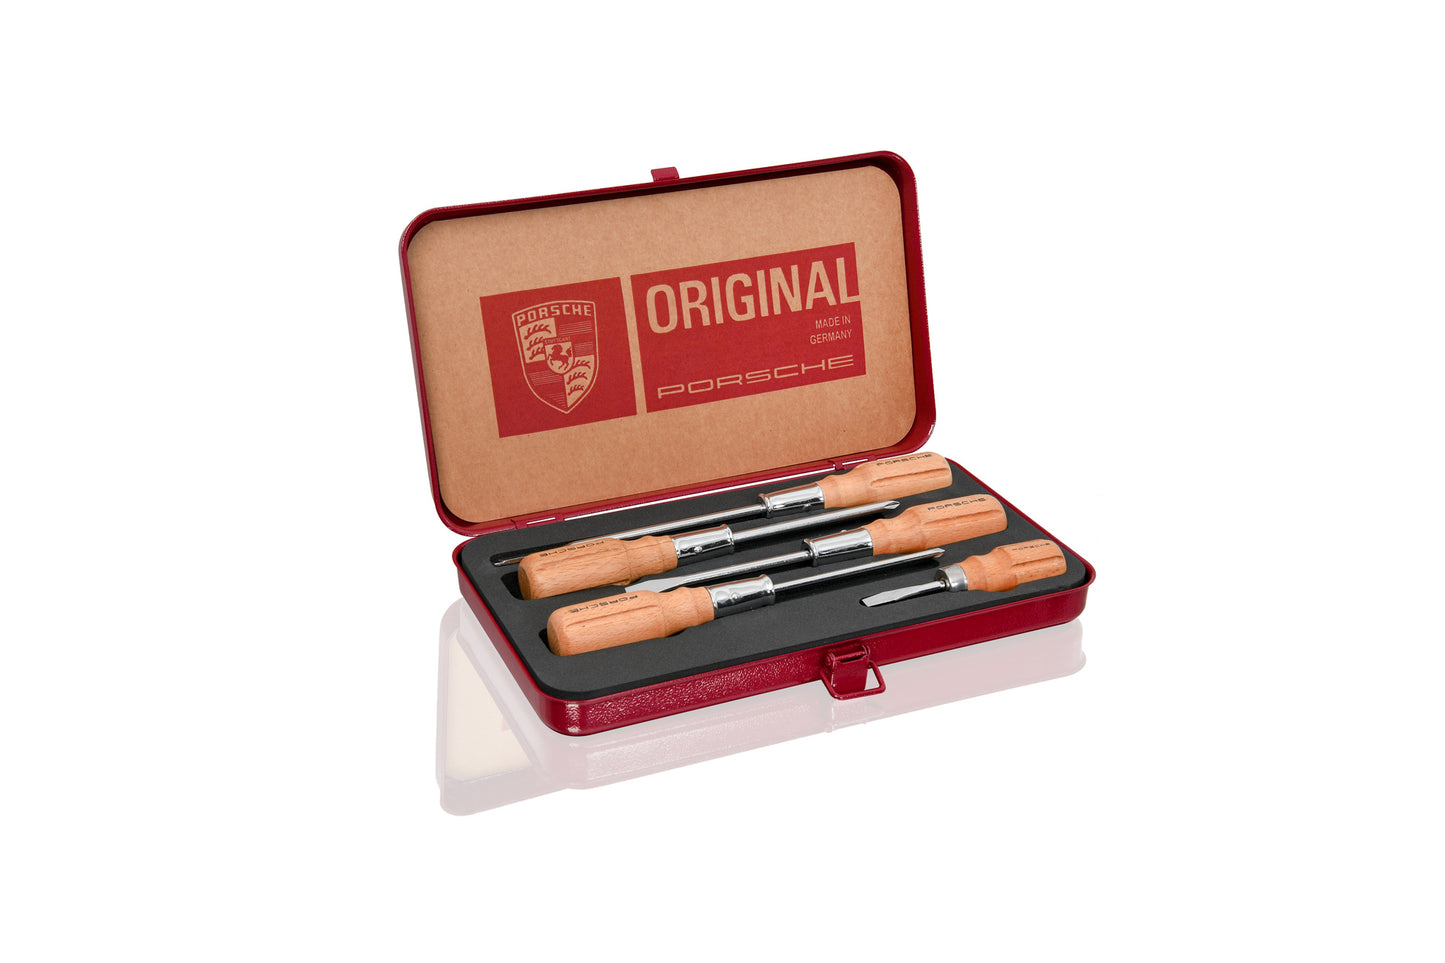 Wooden-handle screwdriver tool set with box, five-piece